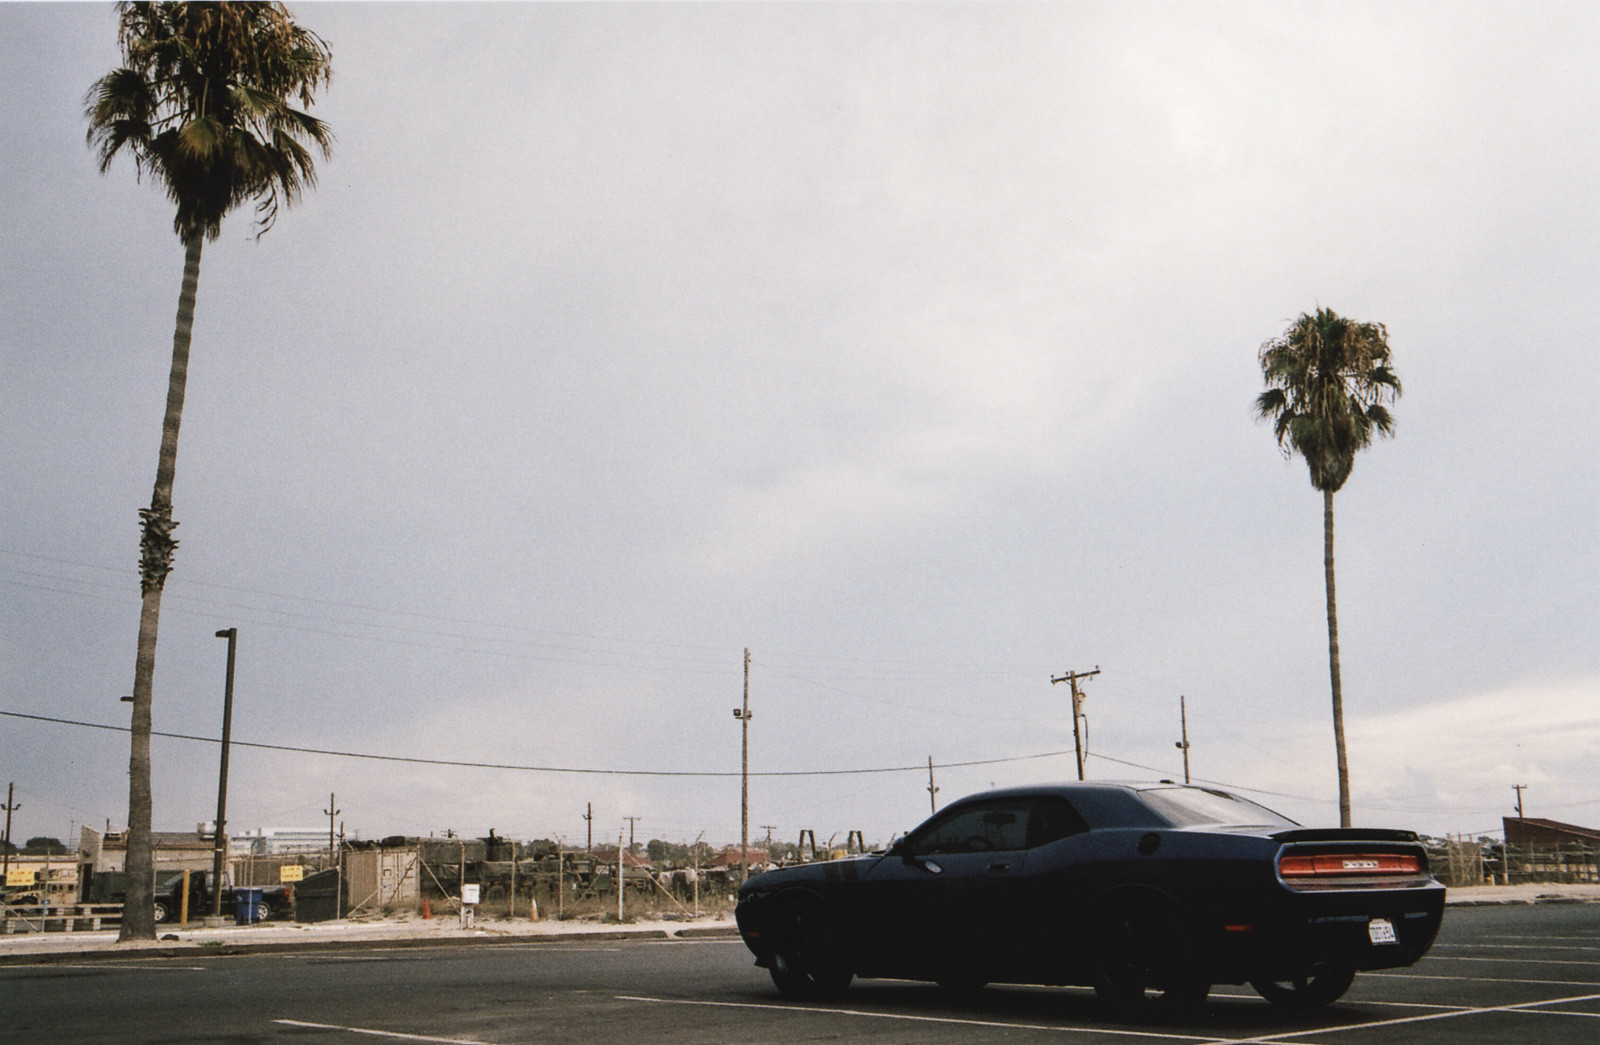 dodge charger on parking lot with palm trees